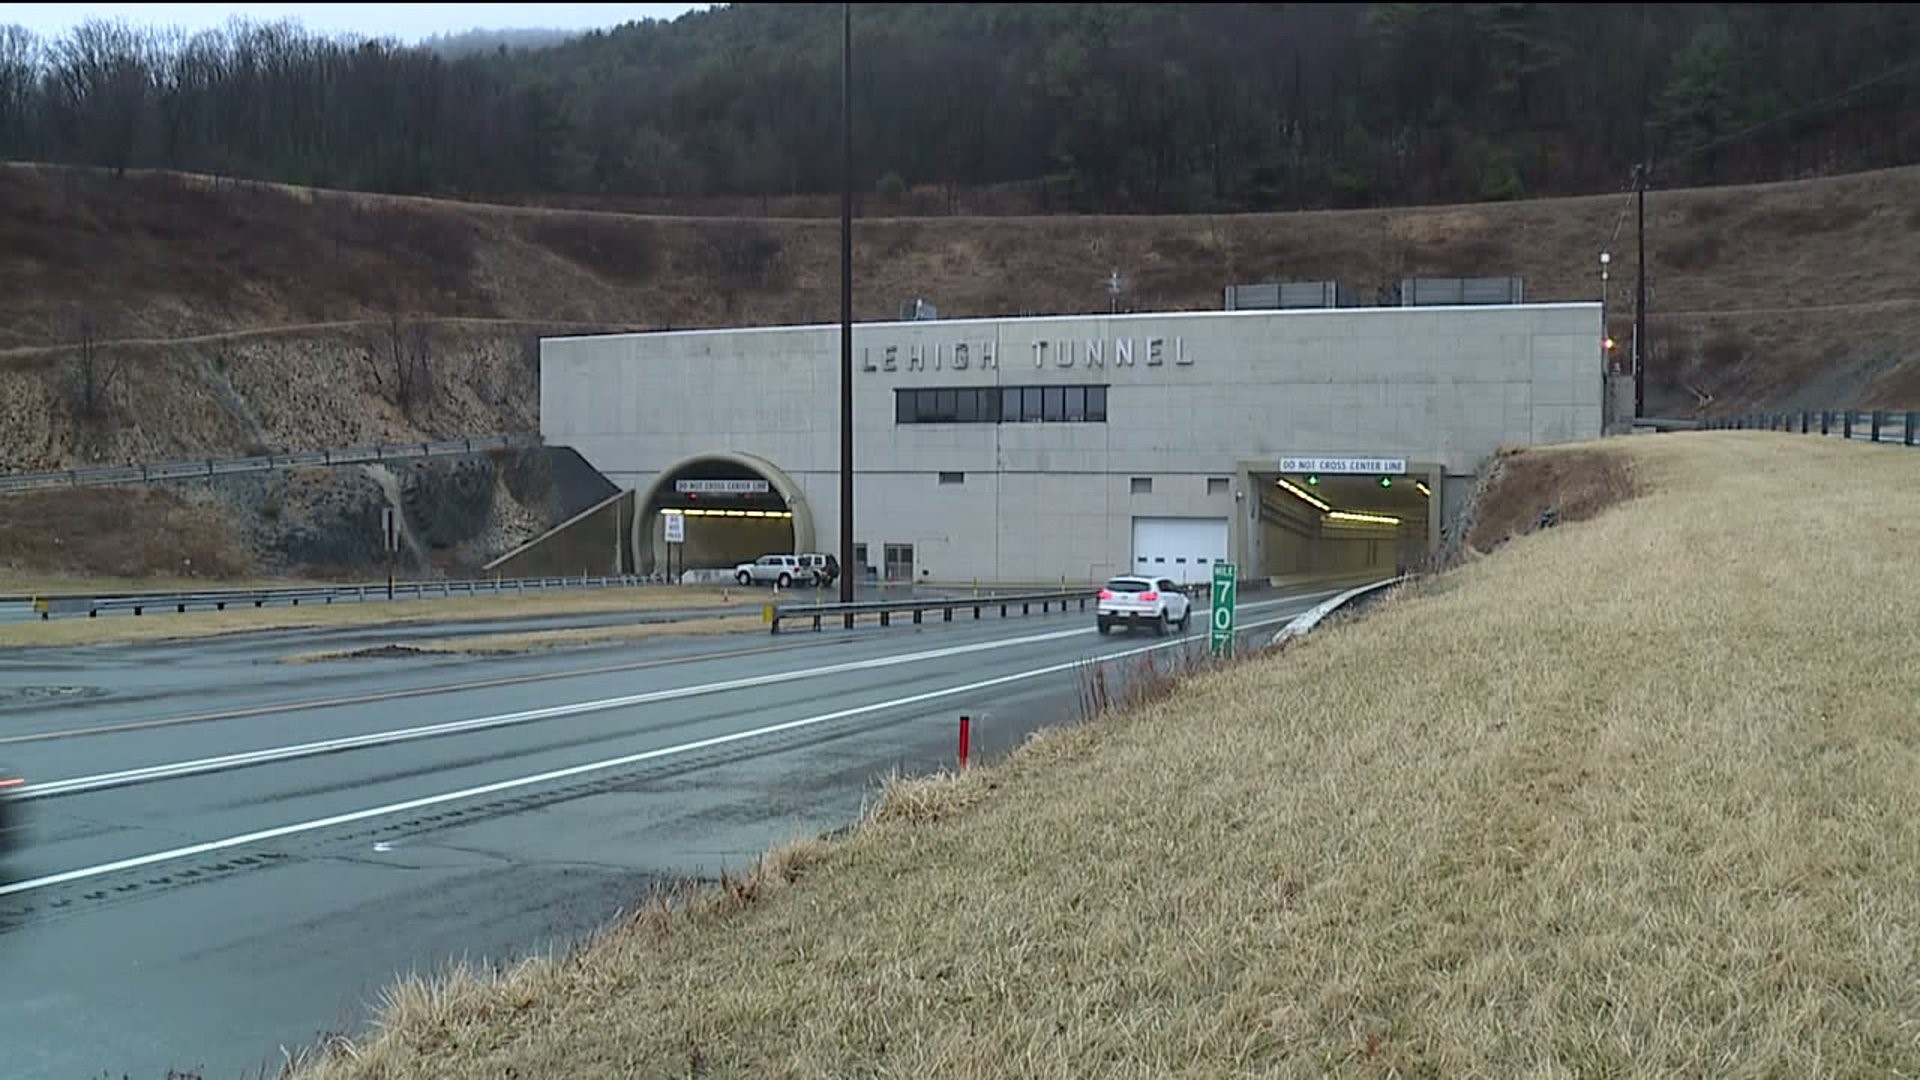 Drivers and Turnpike Officials React After Deadly Incident in Lehigh Tunnel